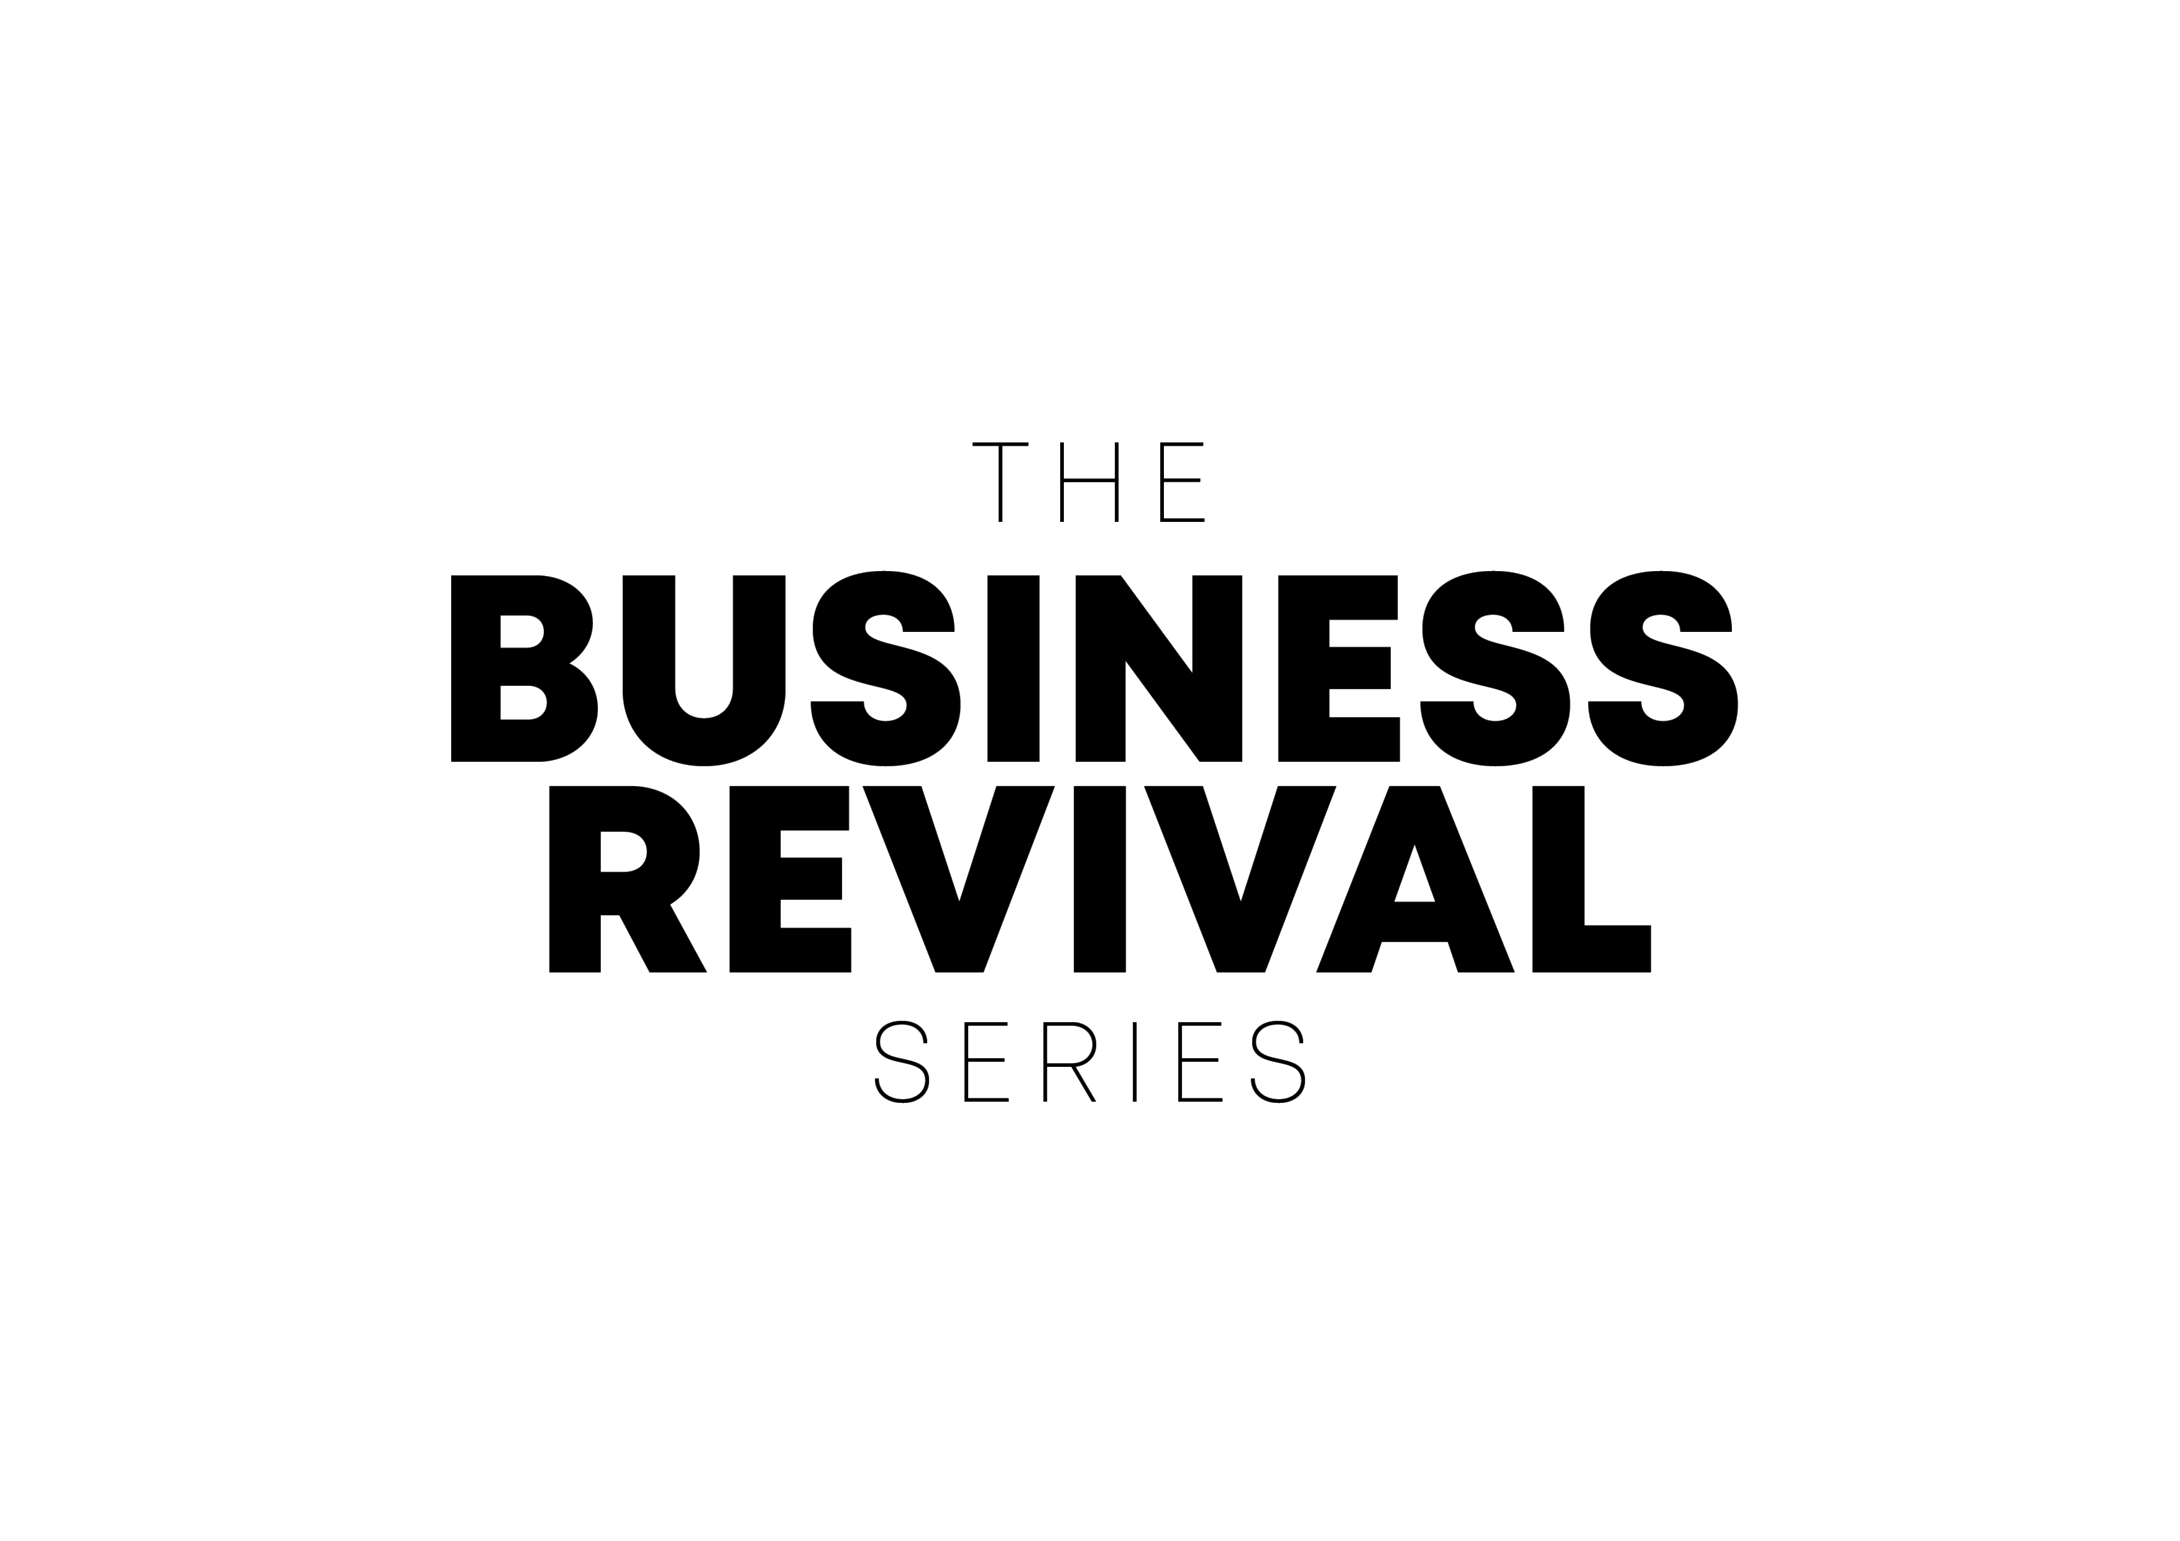 The Business Revival Series written in black